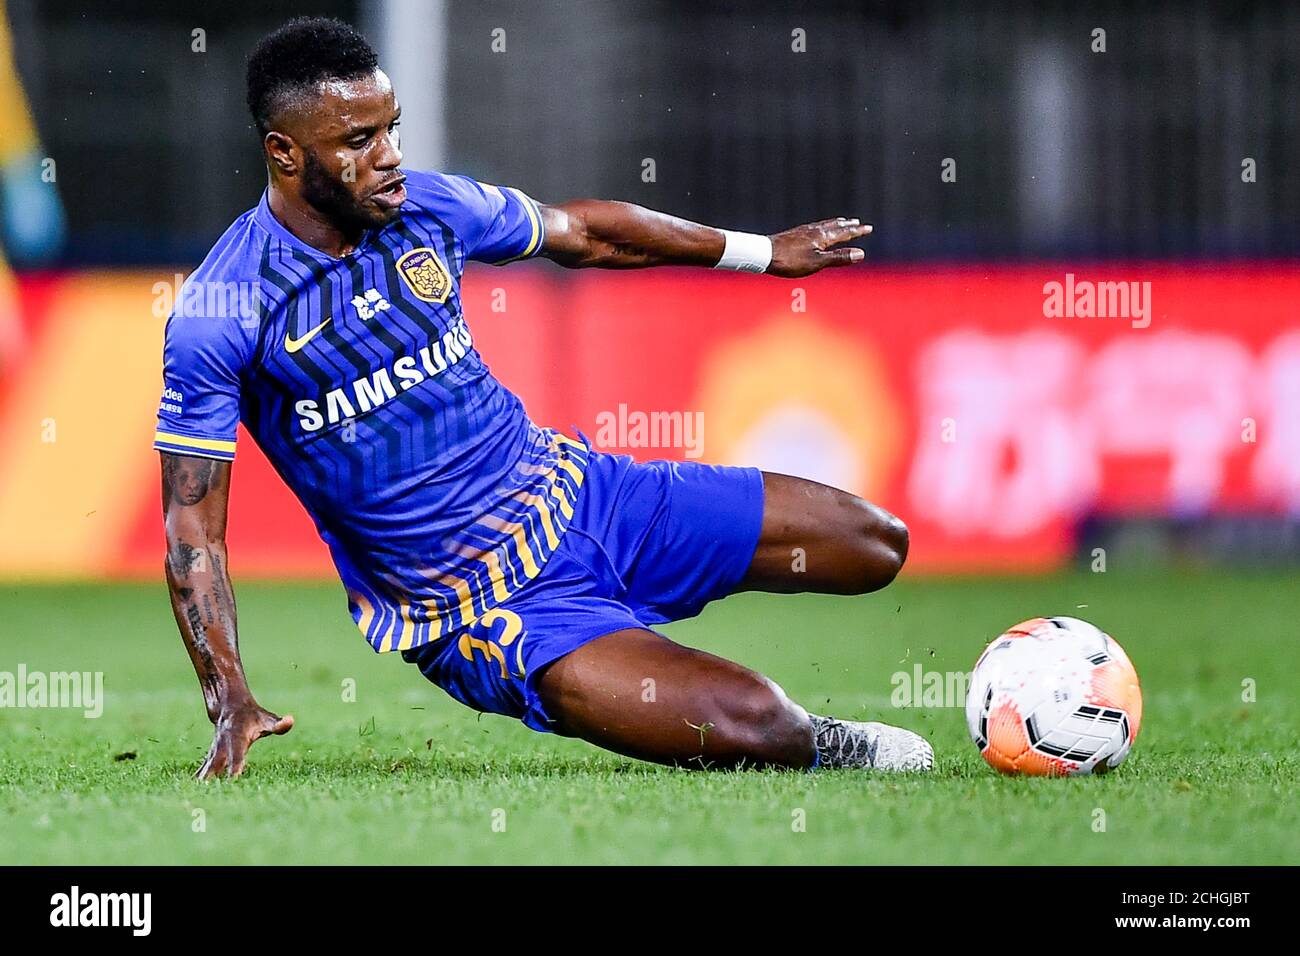 Ghanaian football player Mubarak Wakaso of Jiangsu Suning F.C. keeps the ball during the eleventh-round match of 2020 Chinese Super League (CSL) against Guangzhou R&F F.C., Dalian city, northeast China's Liaoning province, 13 September 2020. Jiangsu Suning F.C. and Guangzhou R&F F.C. drew the game with 3-3. Stock Photo